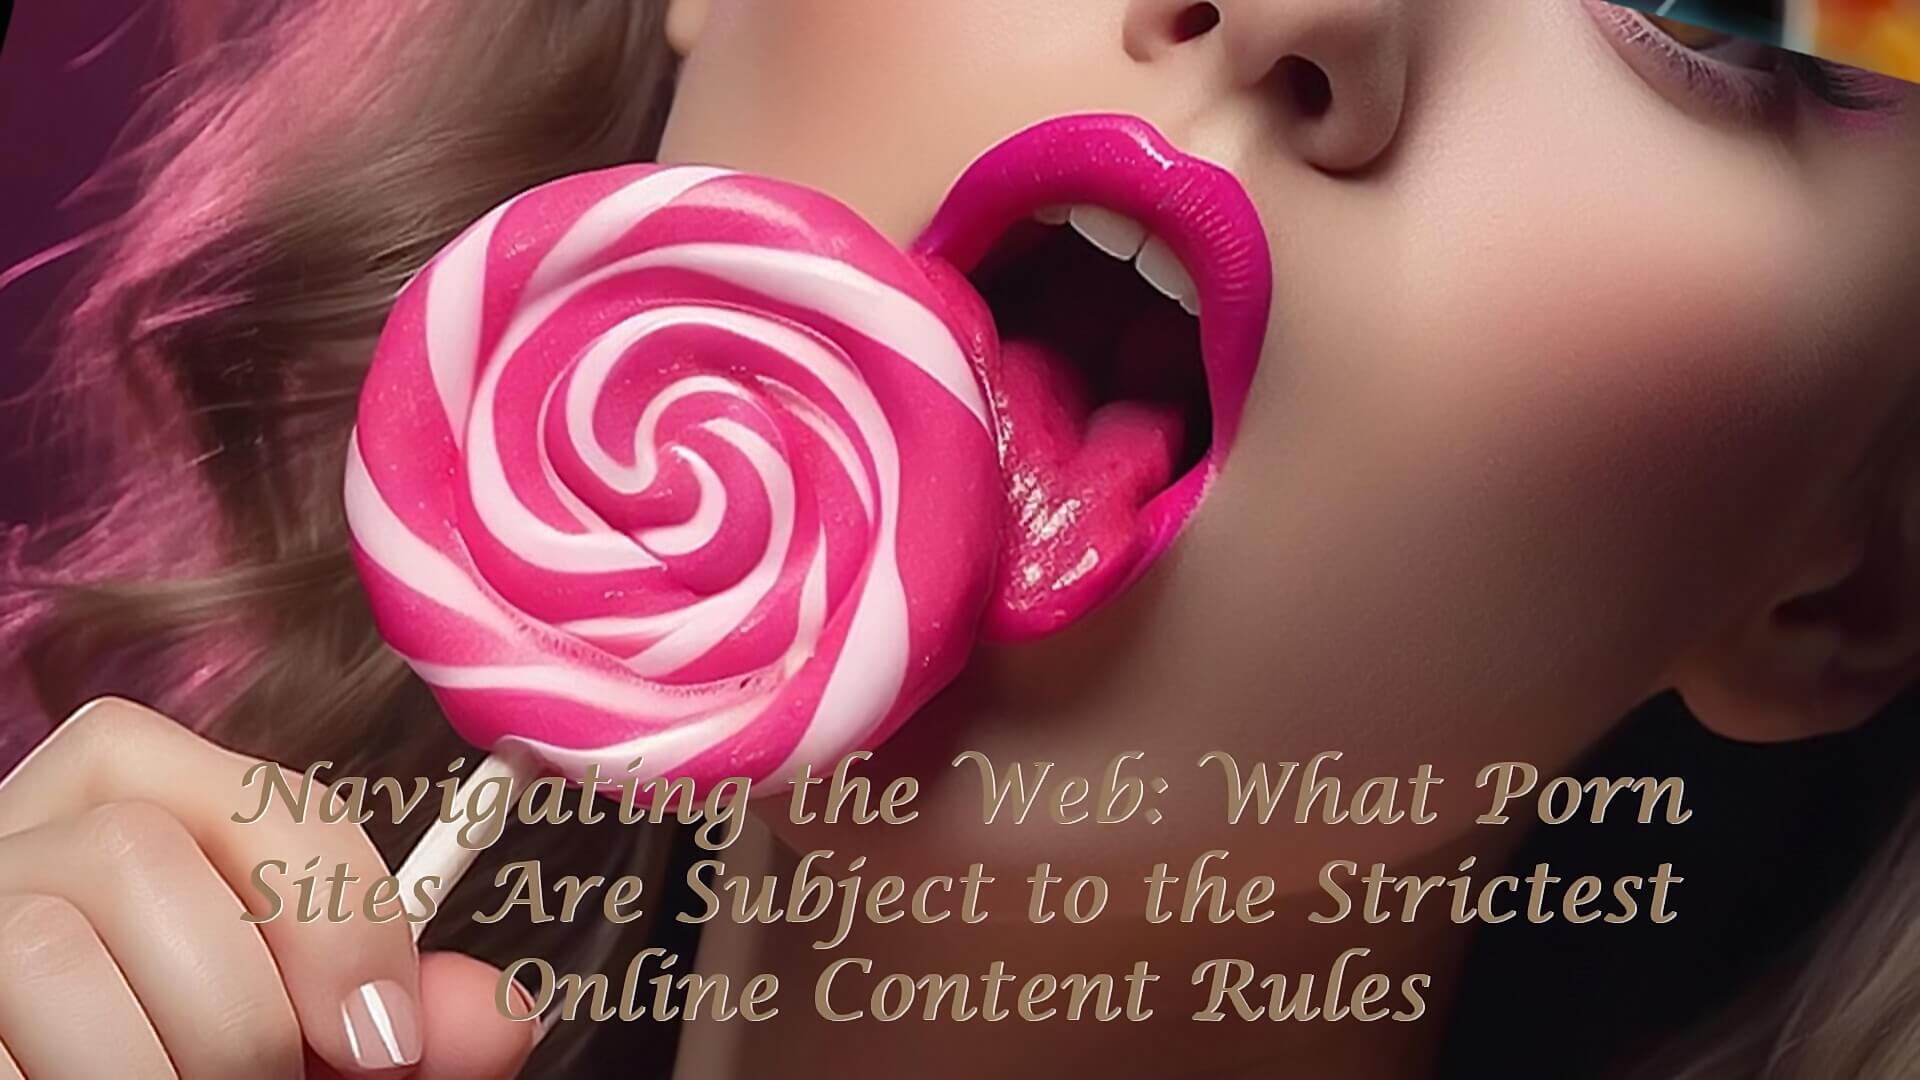 What Porn Sites Are Subject to the Strictest Online Content Rules